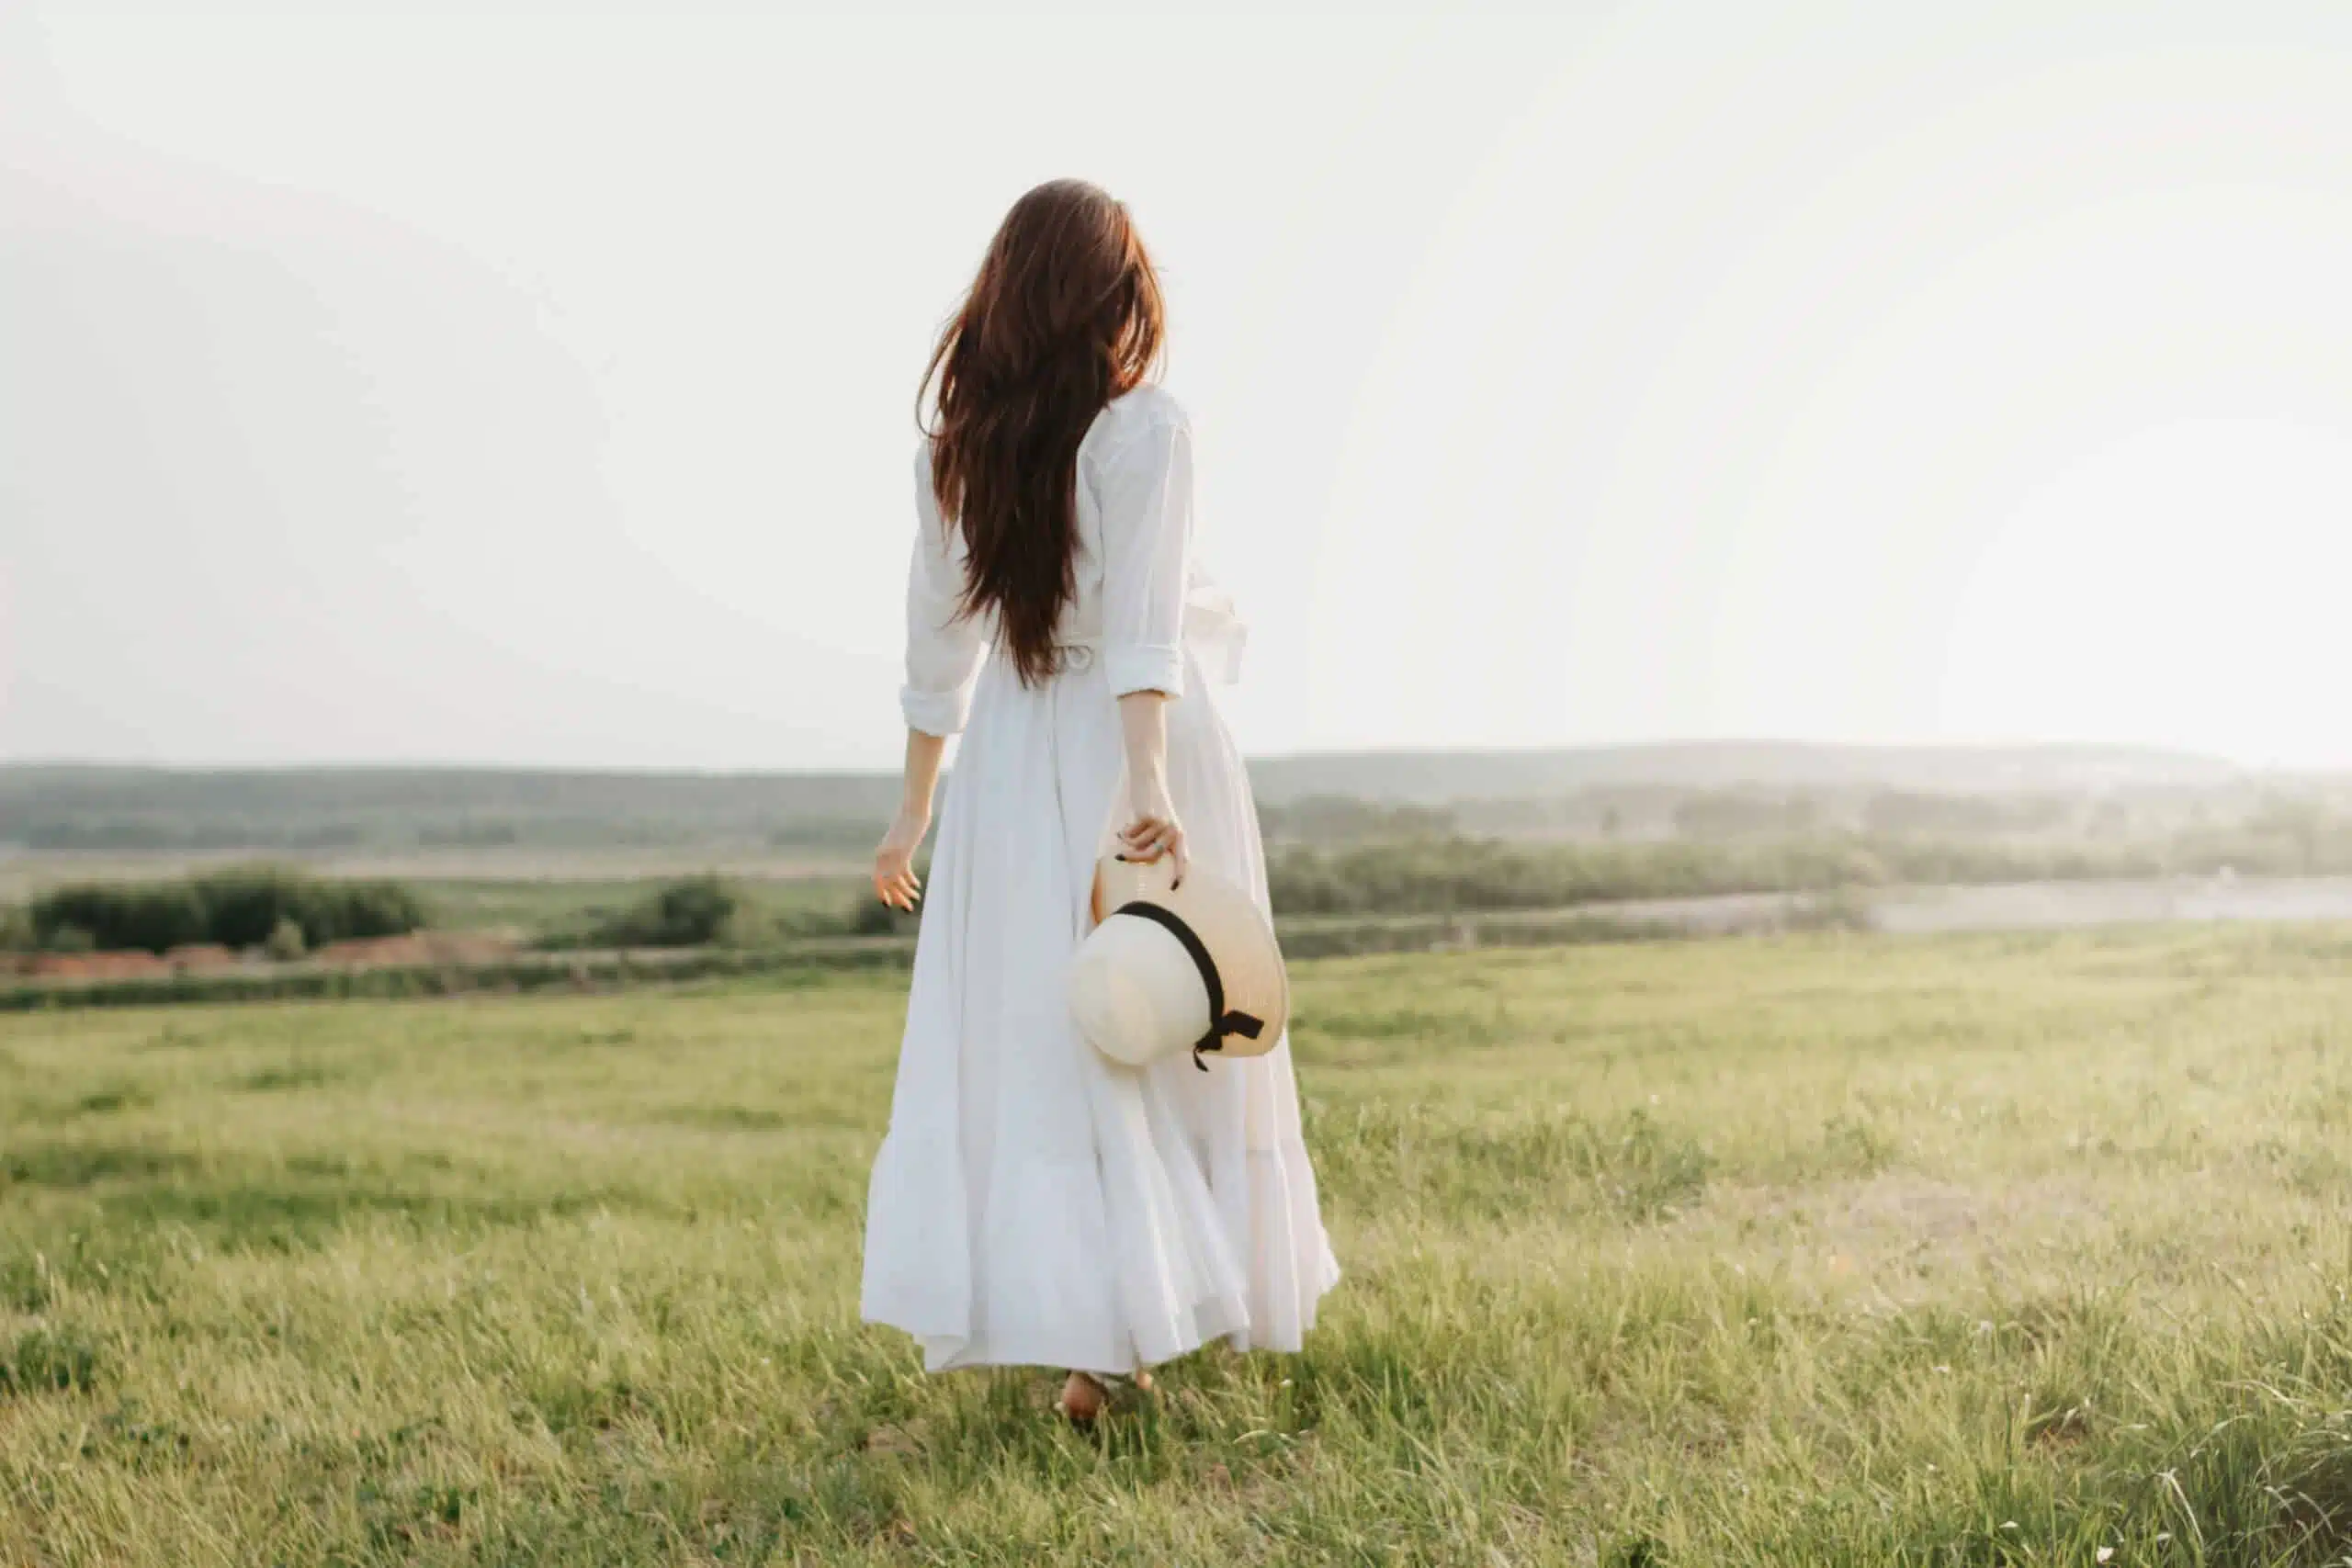 Beautiful carefree long haired woman in white dress and straw hat enjoys life in nature field looking towards the sunset.